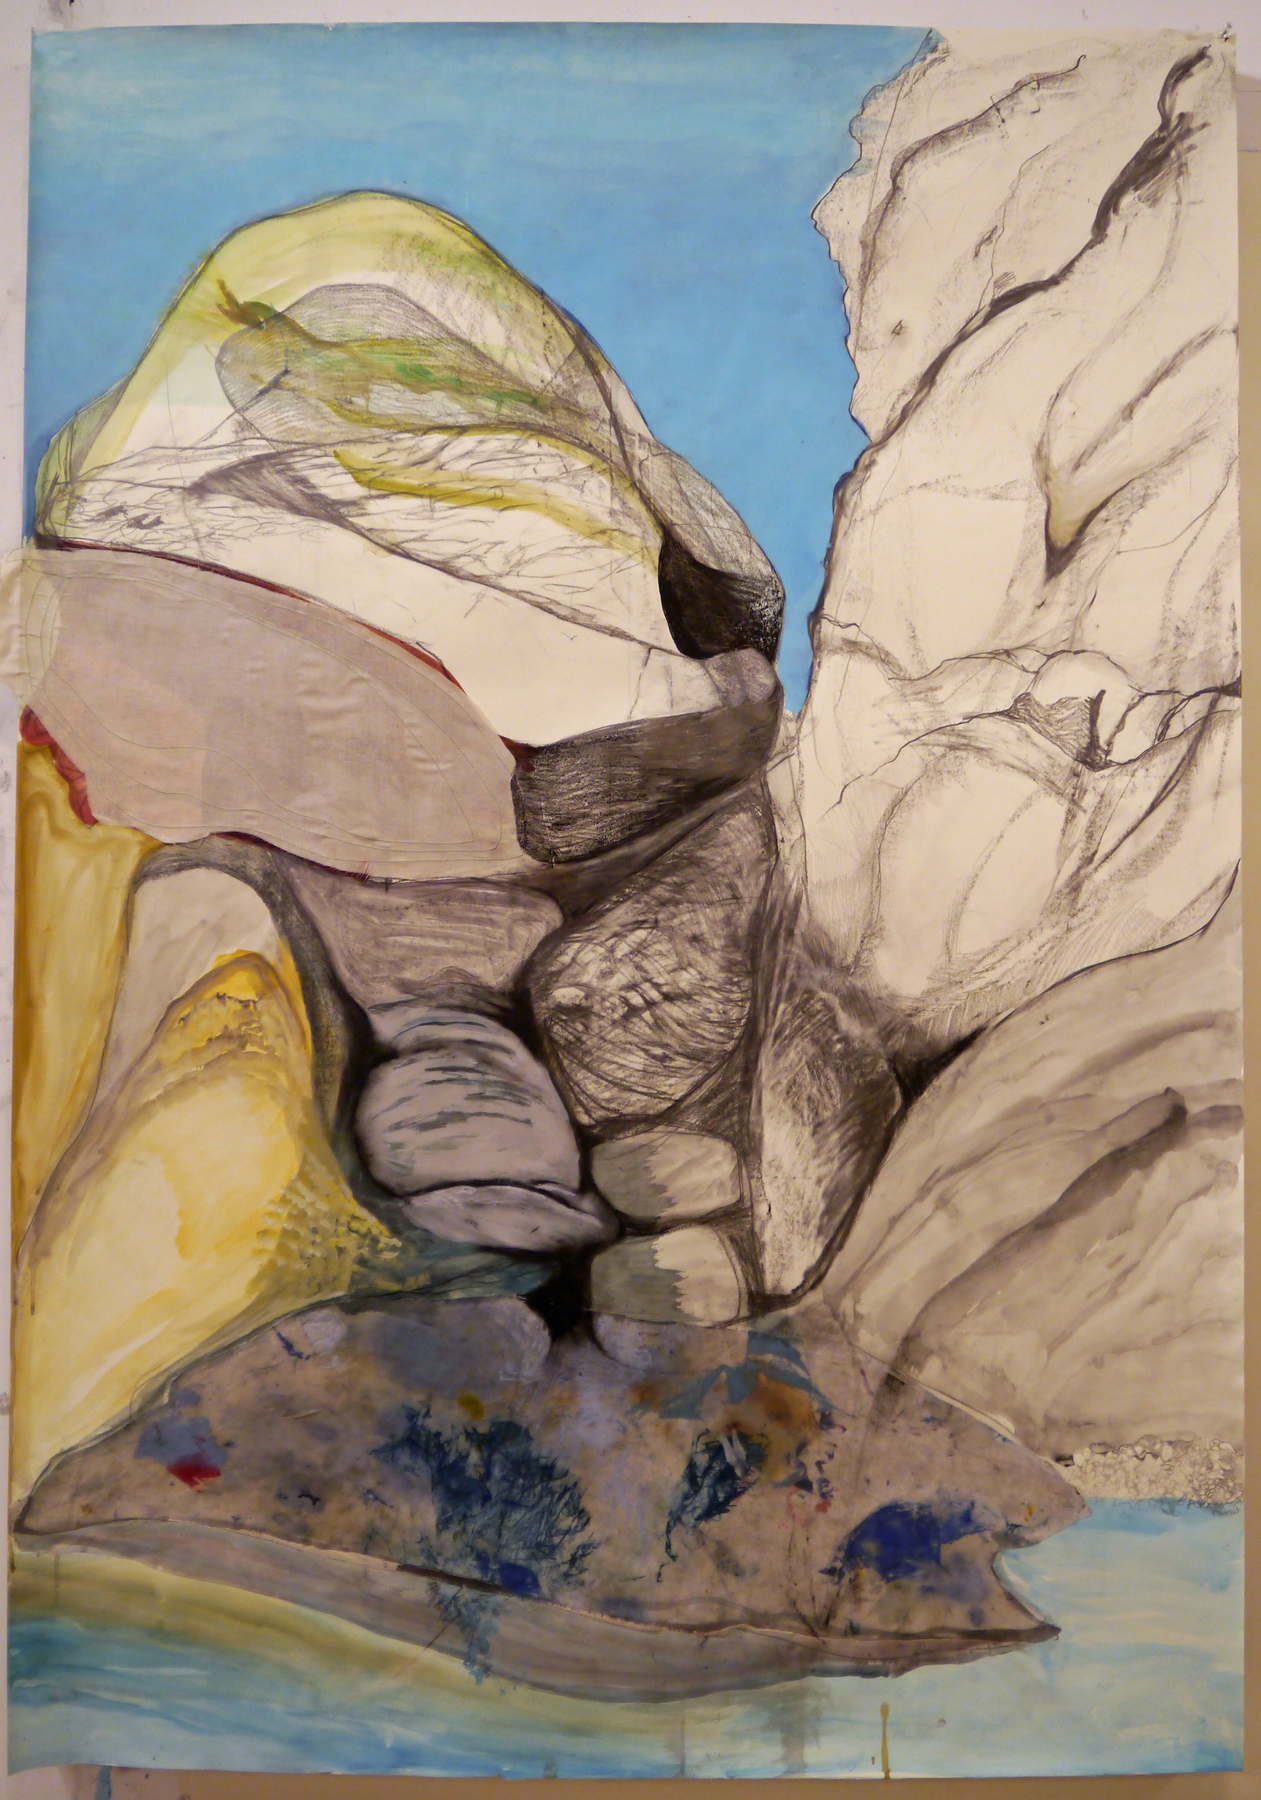    Rock Dreaming of Rocks   acrylic, graphite and stitched fabric on paper, 60 x 42 inches 